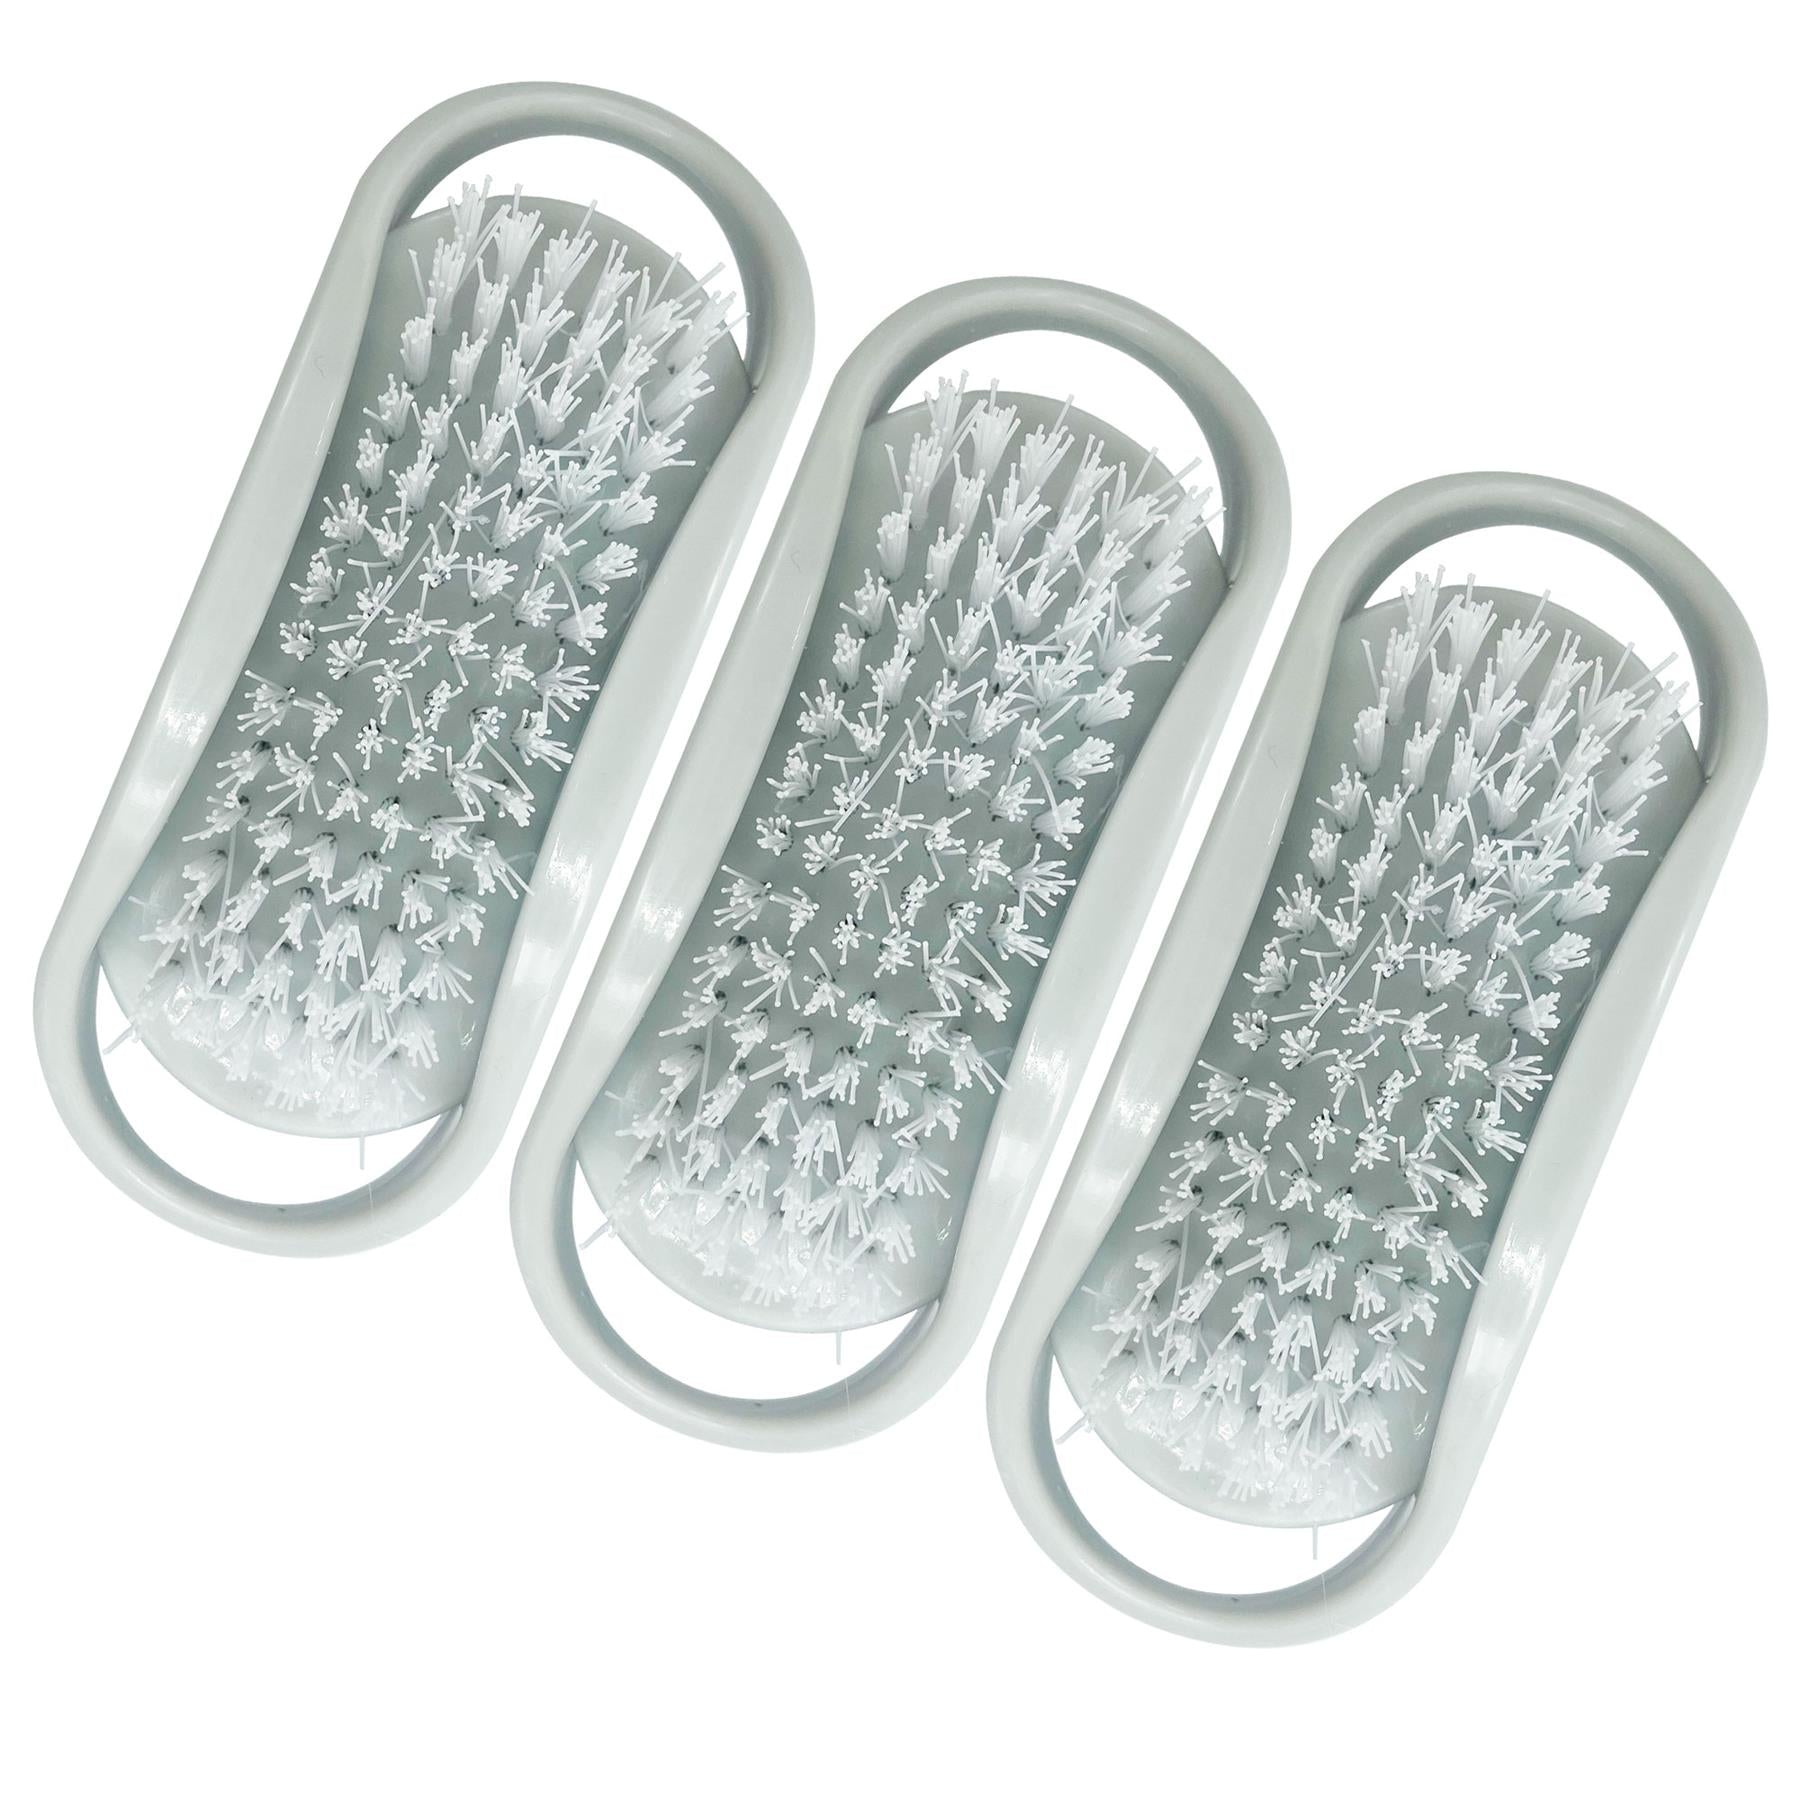 Silver Plastic Nail Brush - Pack of 3